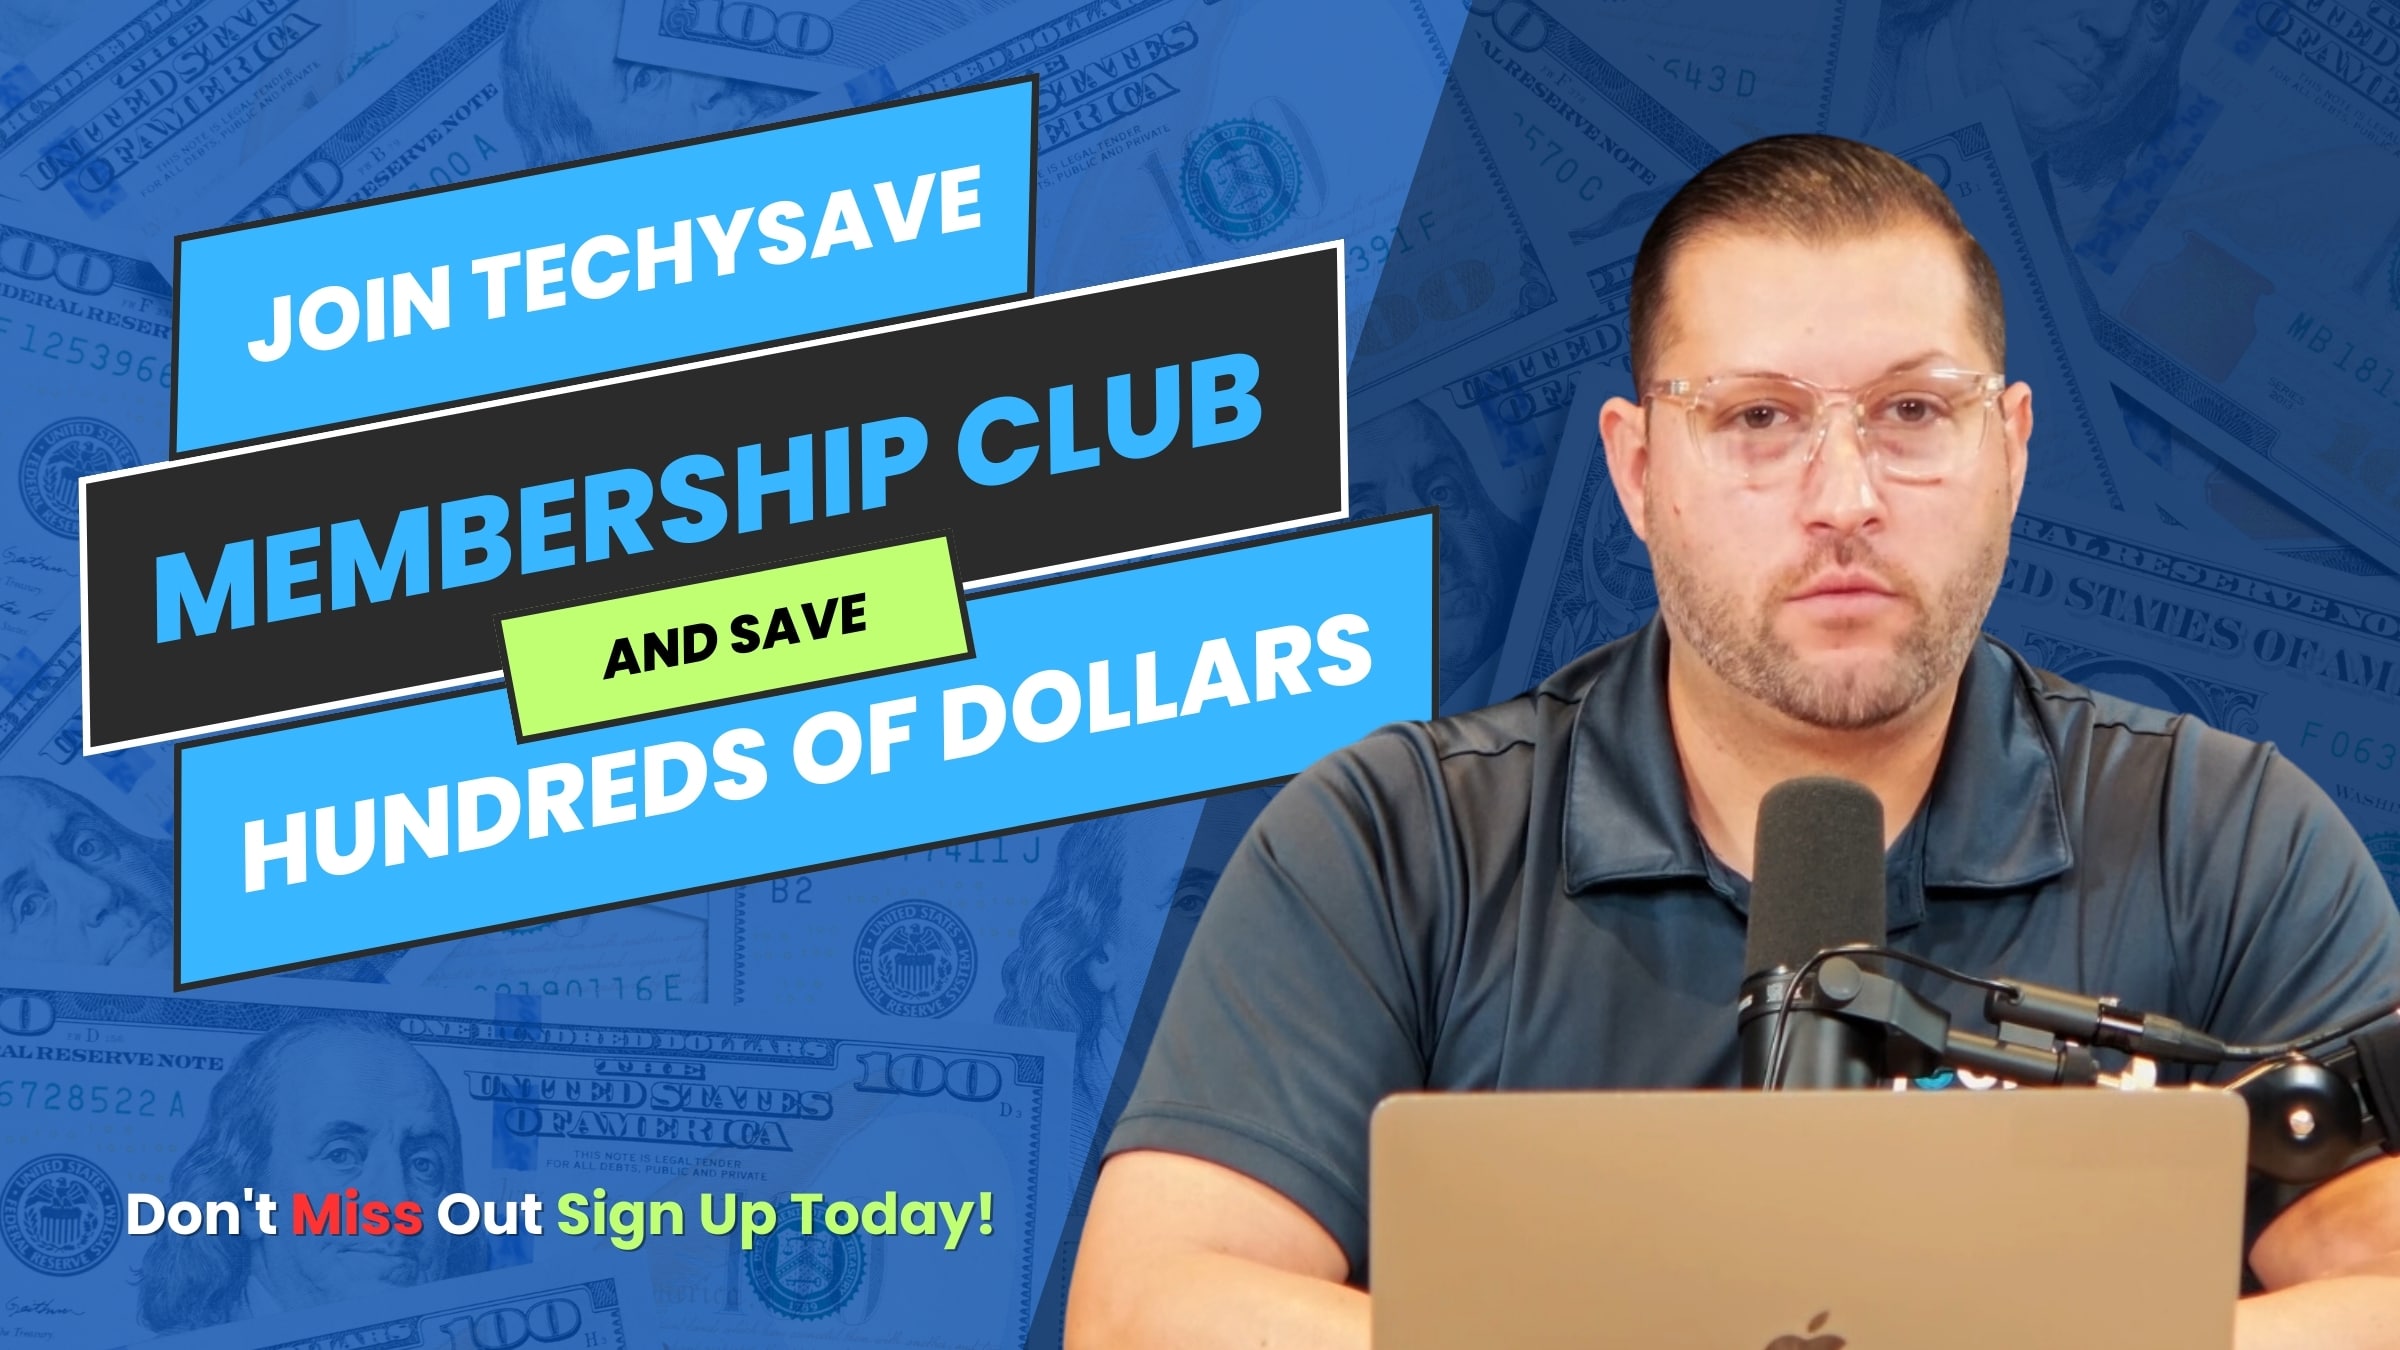 Join Techy Save Membership Club And Save Hundreds Of Dollars